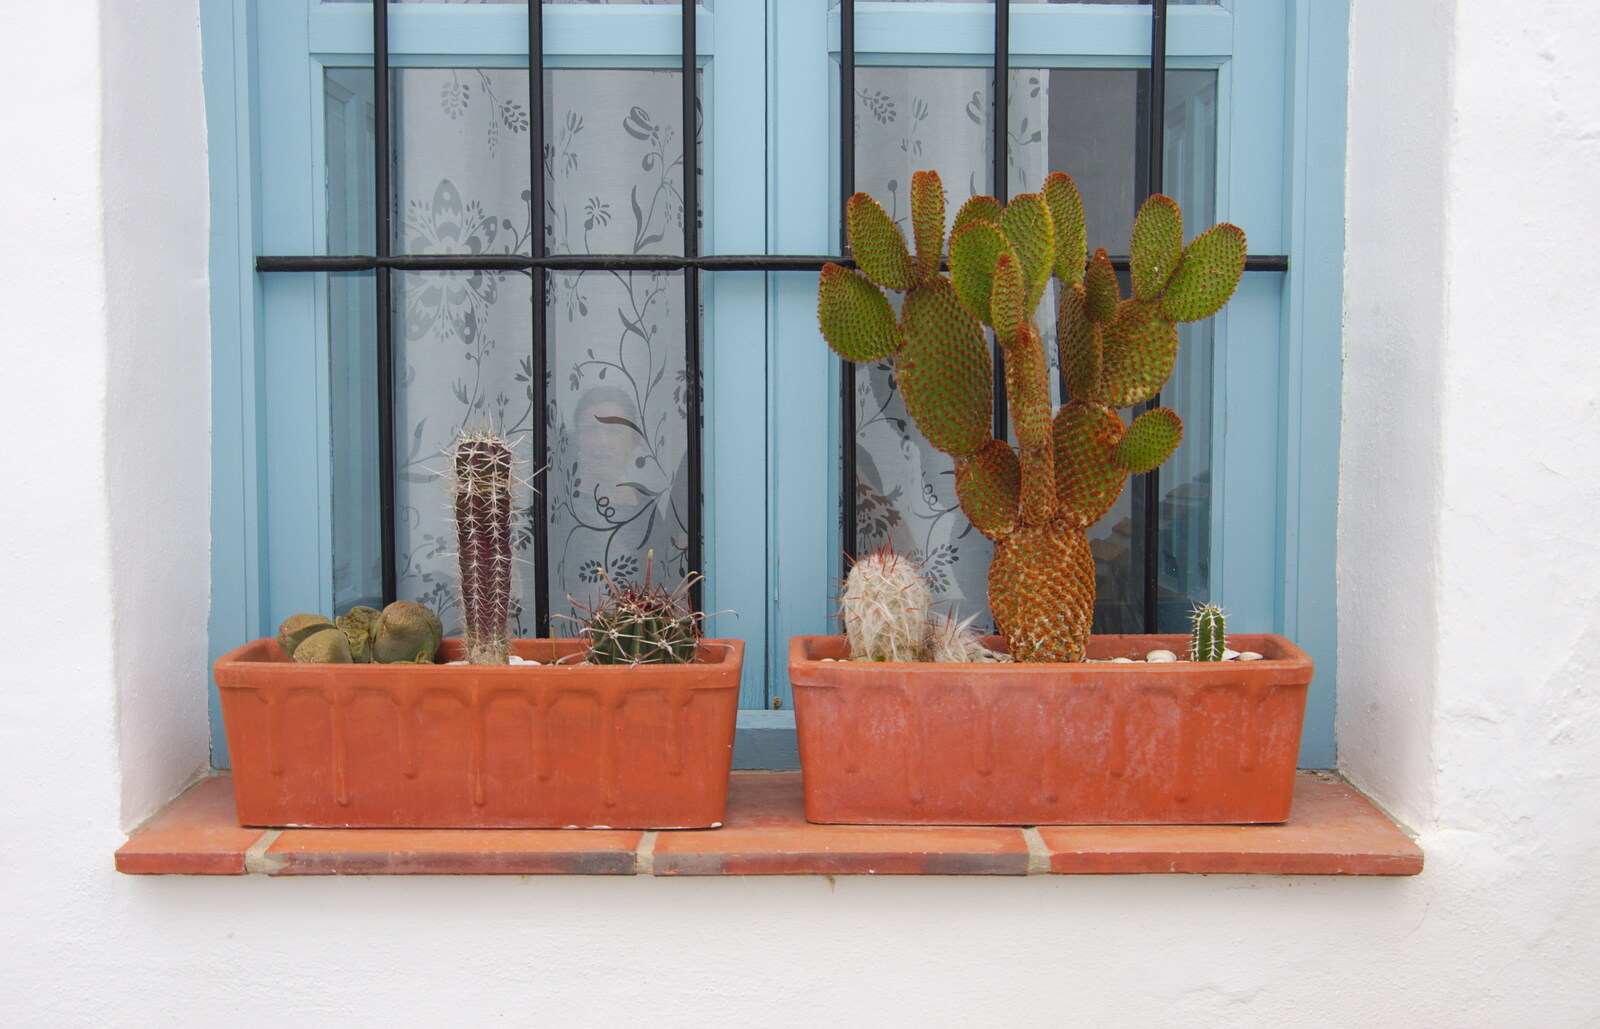 Amusing cacti on a windowsill from The Caves of Nerja, and Frigiliana, Andalusia, Spain - 18th April 2019